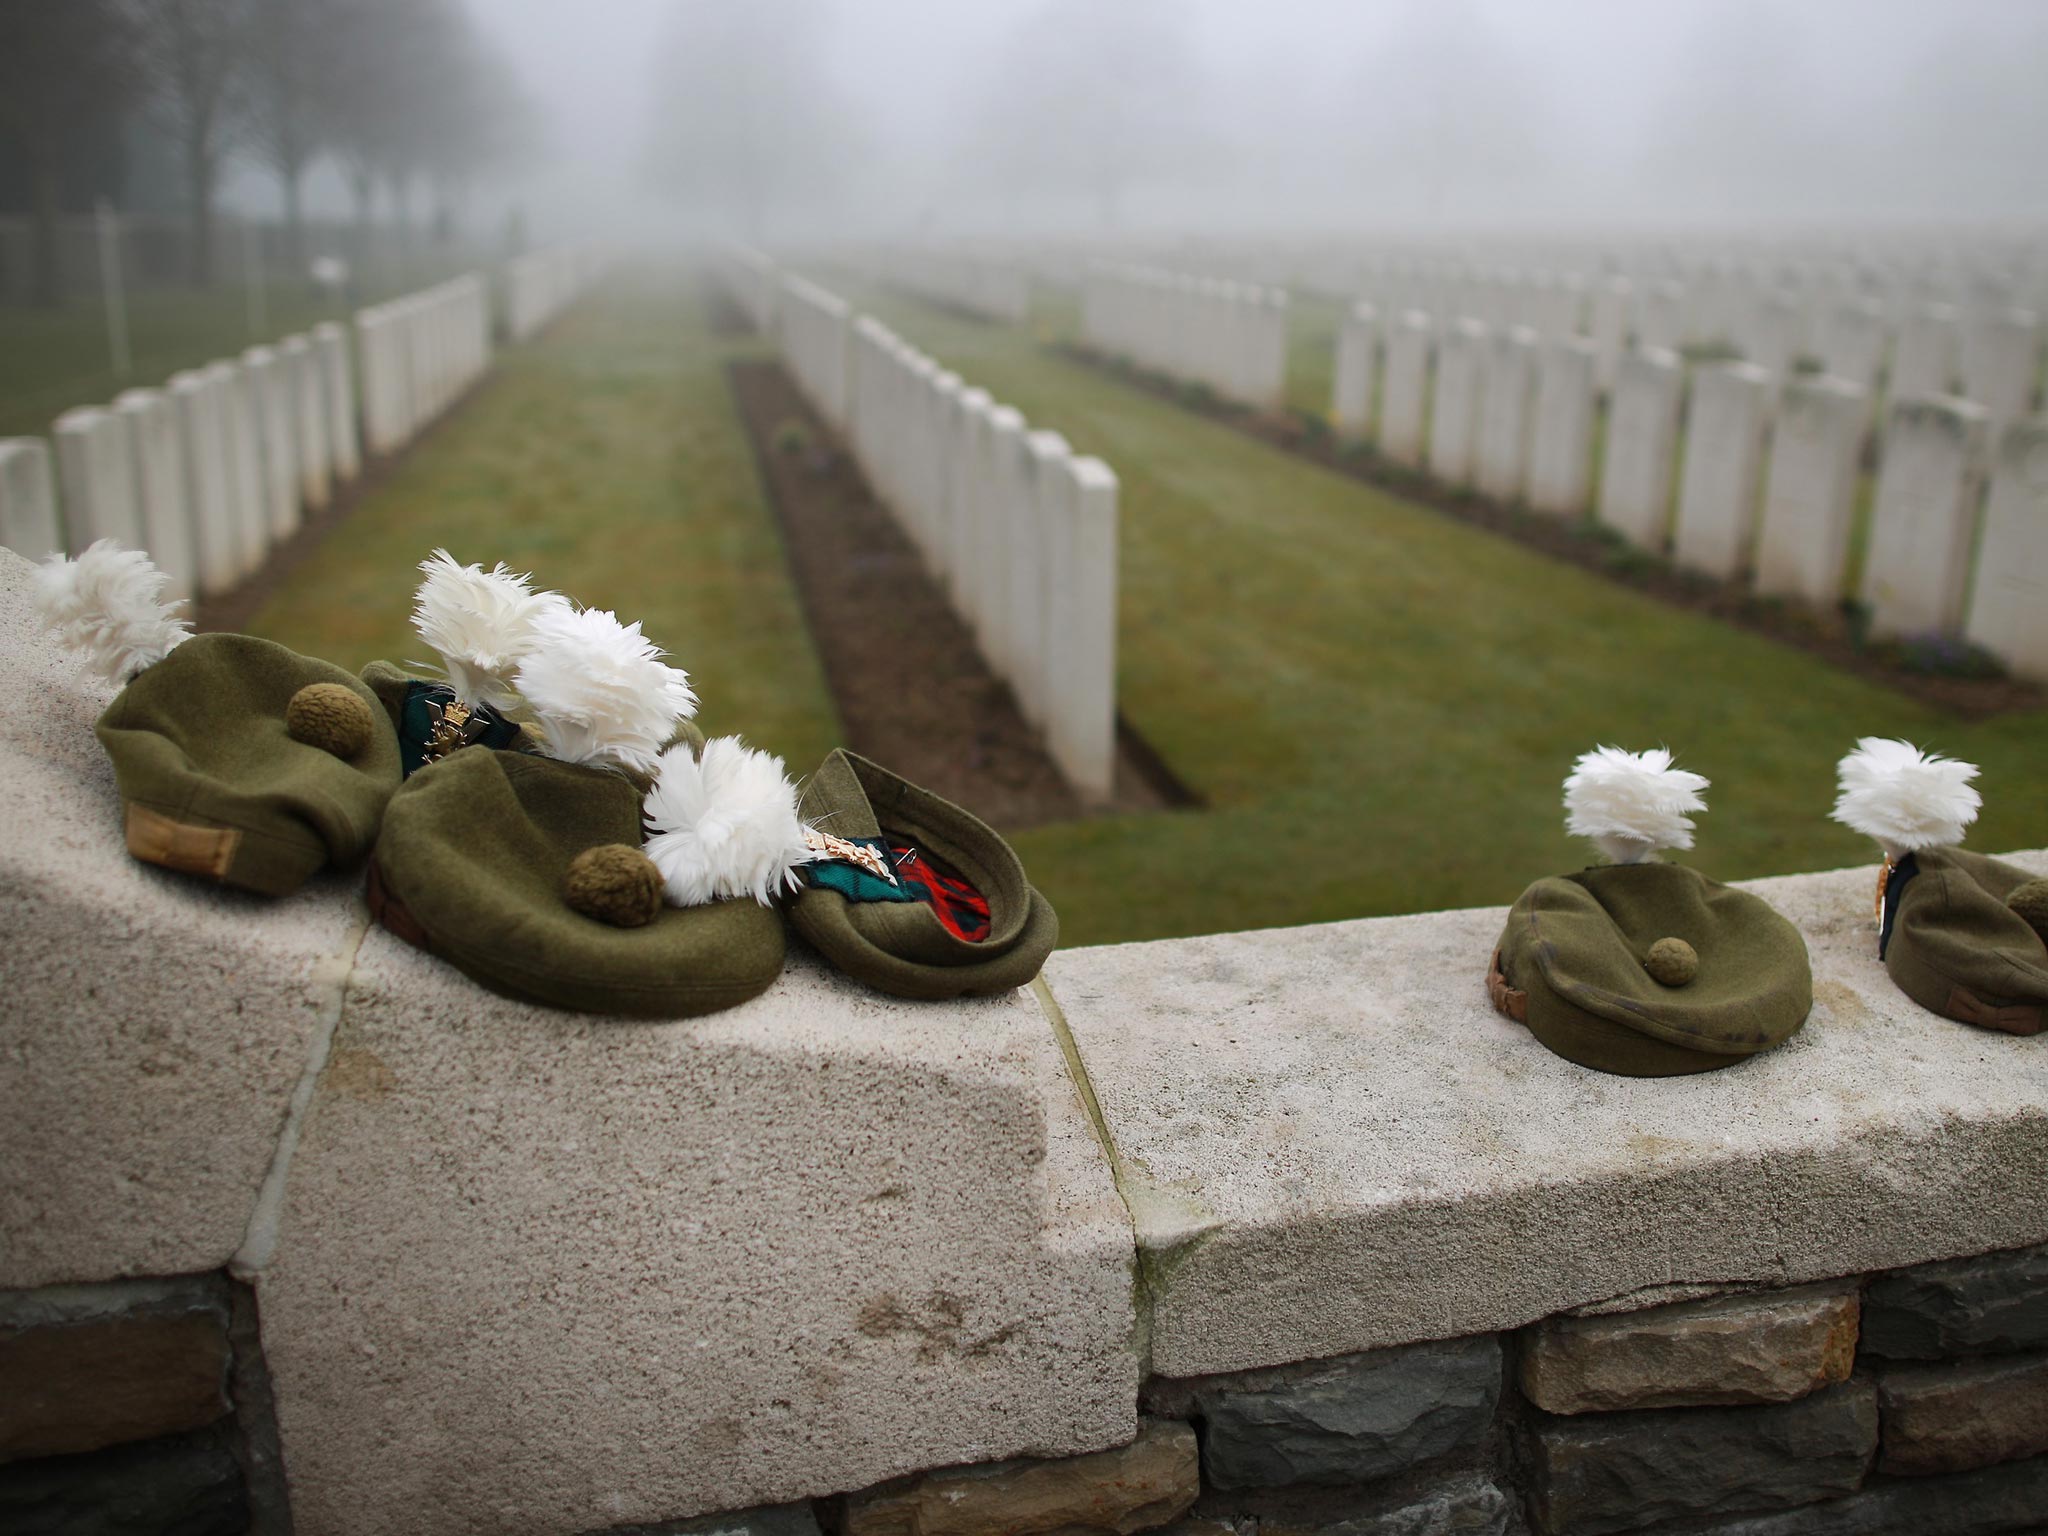 Military Tam O Shanter caps belonging to soldiers of The 2nd Battalion The Royal Regiment of Scotland are placed on the wall of Loos British Cemetery